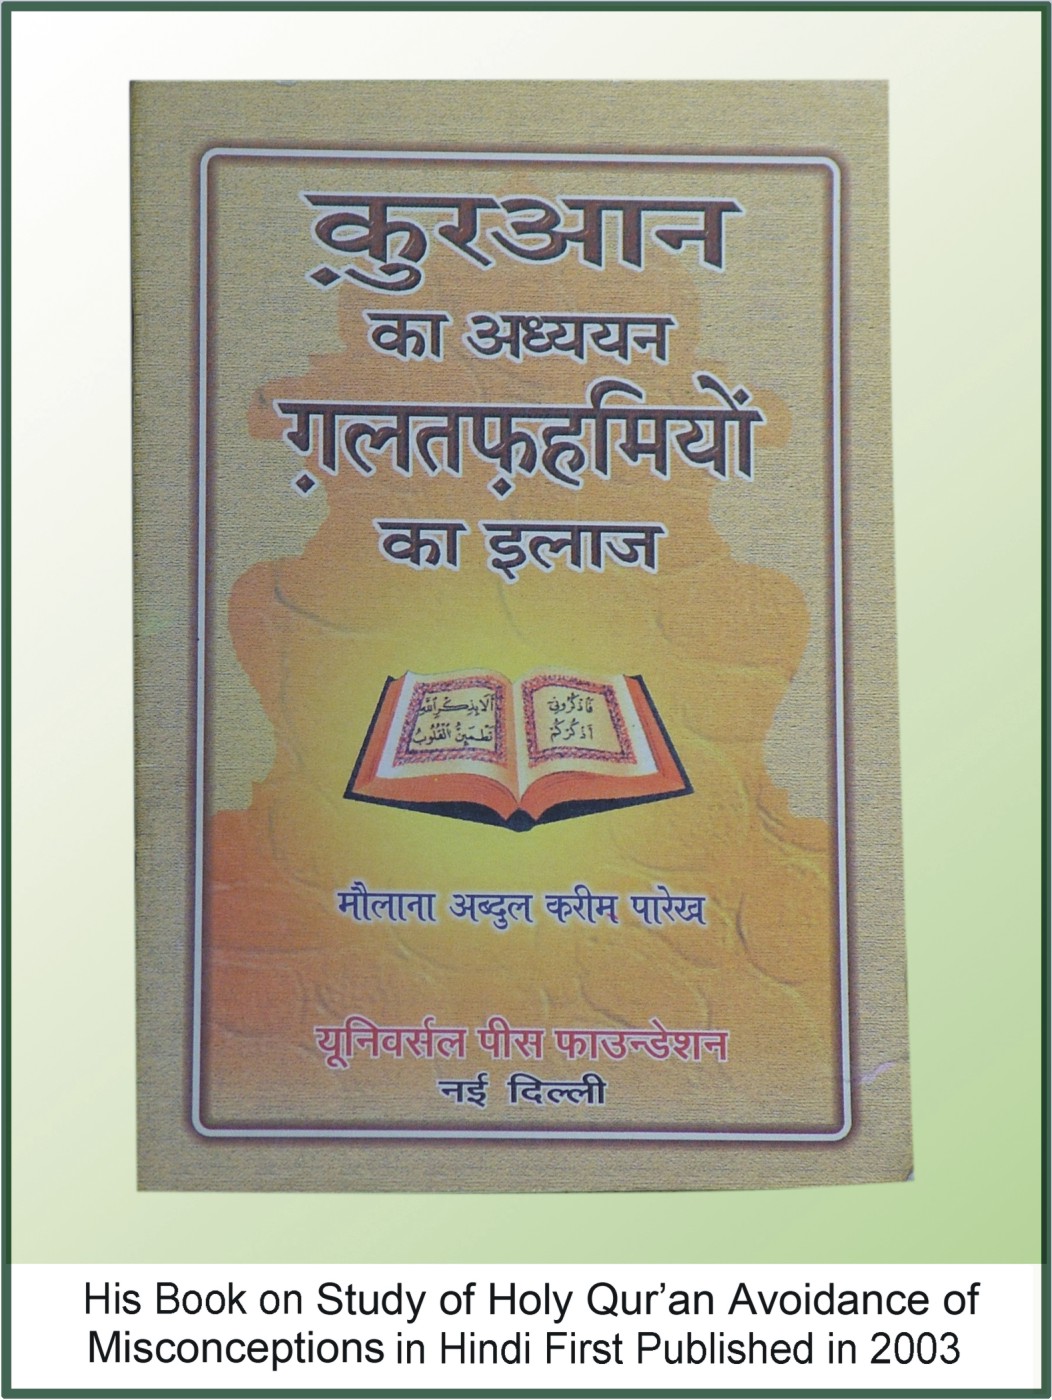 Study of The Holy Qur'an, Avoidance of Misconceptions (Hindi) First Published in 2003